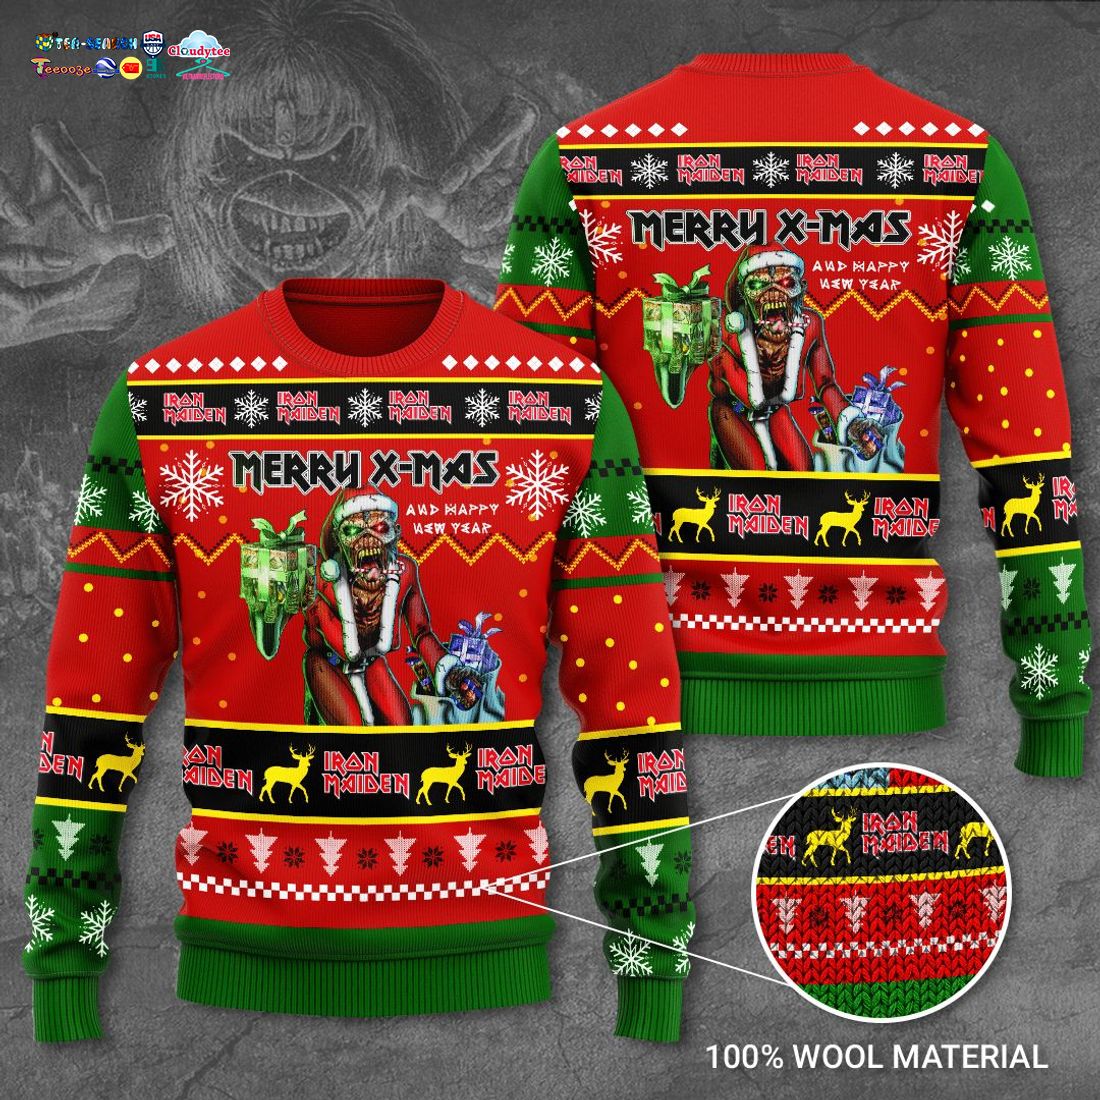 Iron Maiden Merry Xmas And Happy New Year Ugly Christmas Sweater